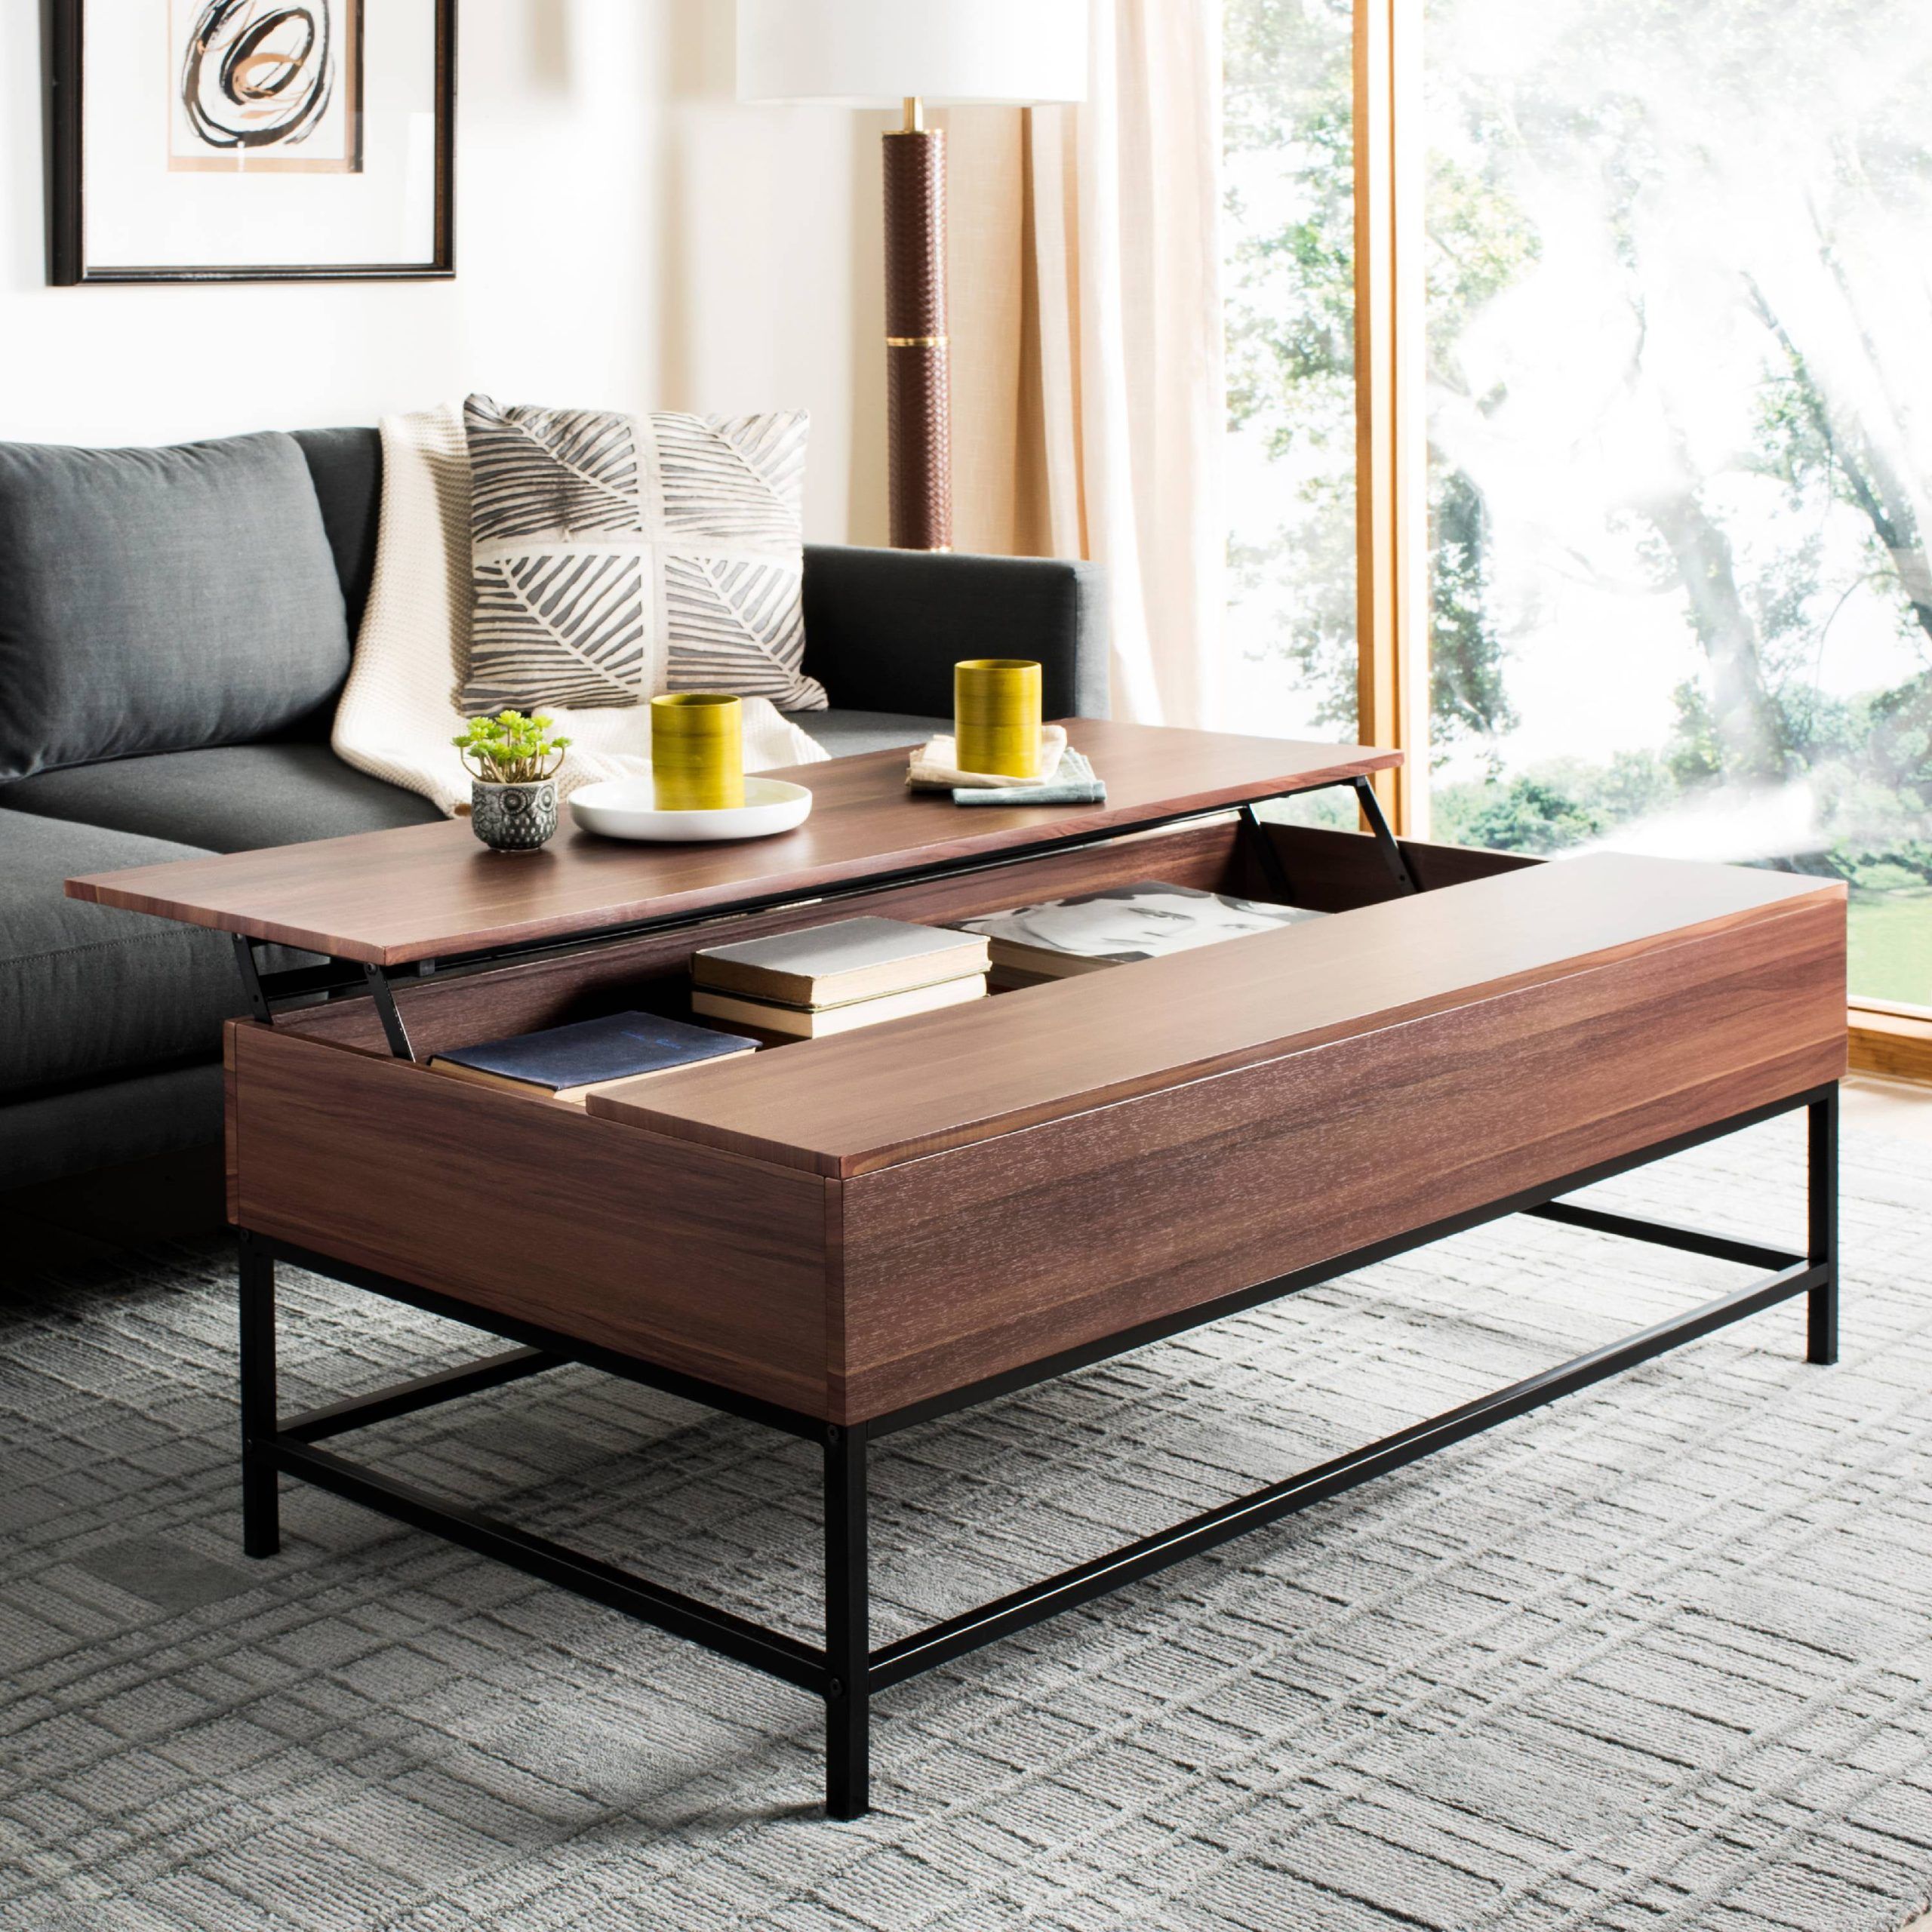 Safavieh Gina Contemporary Lift Top Coffee Table With Storage – Walmart In Lift Top Coffee Tables With Shelves (View 7 of 20)